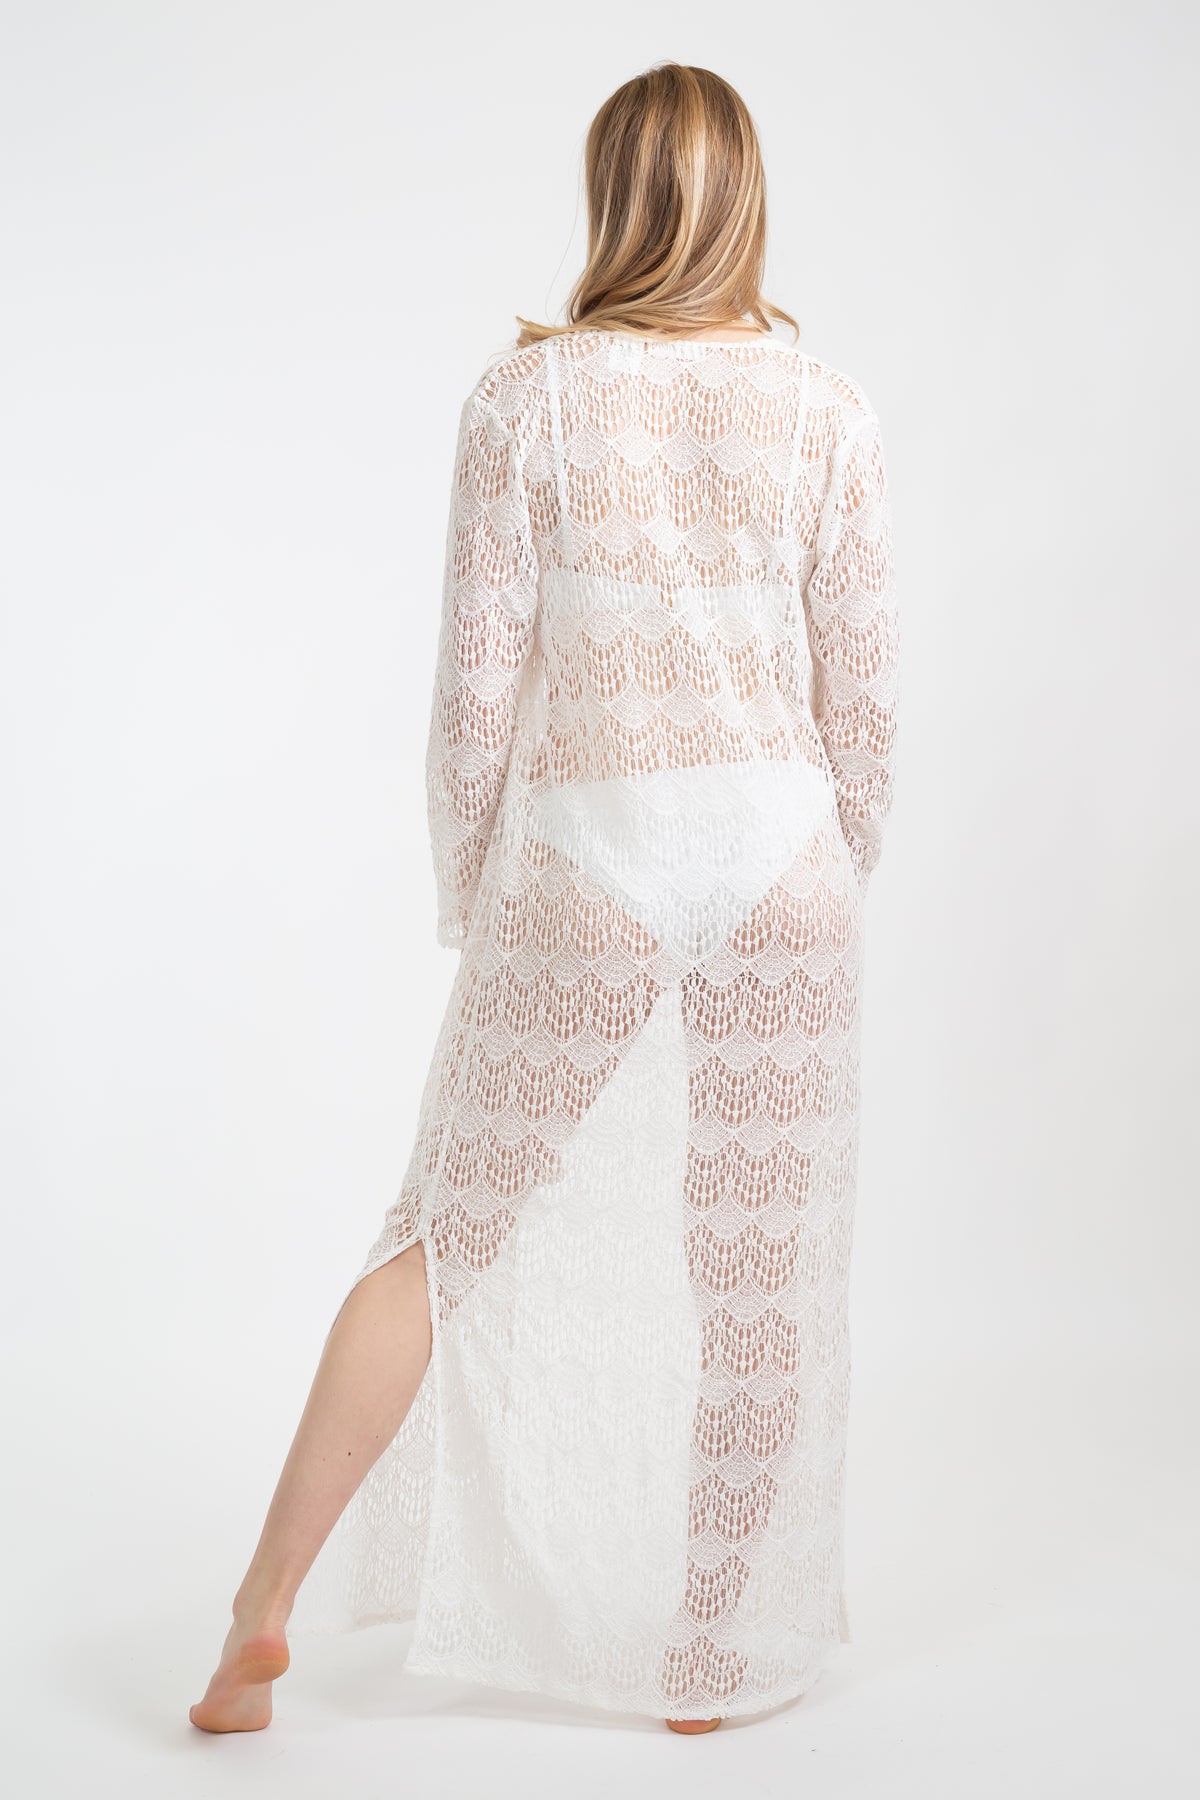 Koy Resort travel and beach wear. Long white flamenco collection cardigan on model facing from. Featuring long sleeves in white lace with tassles. 